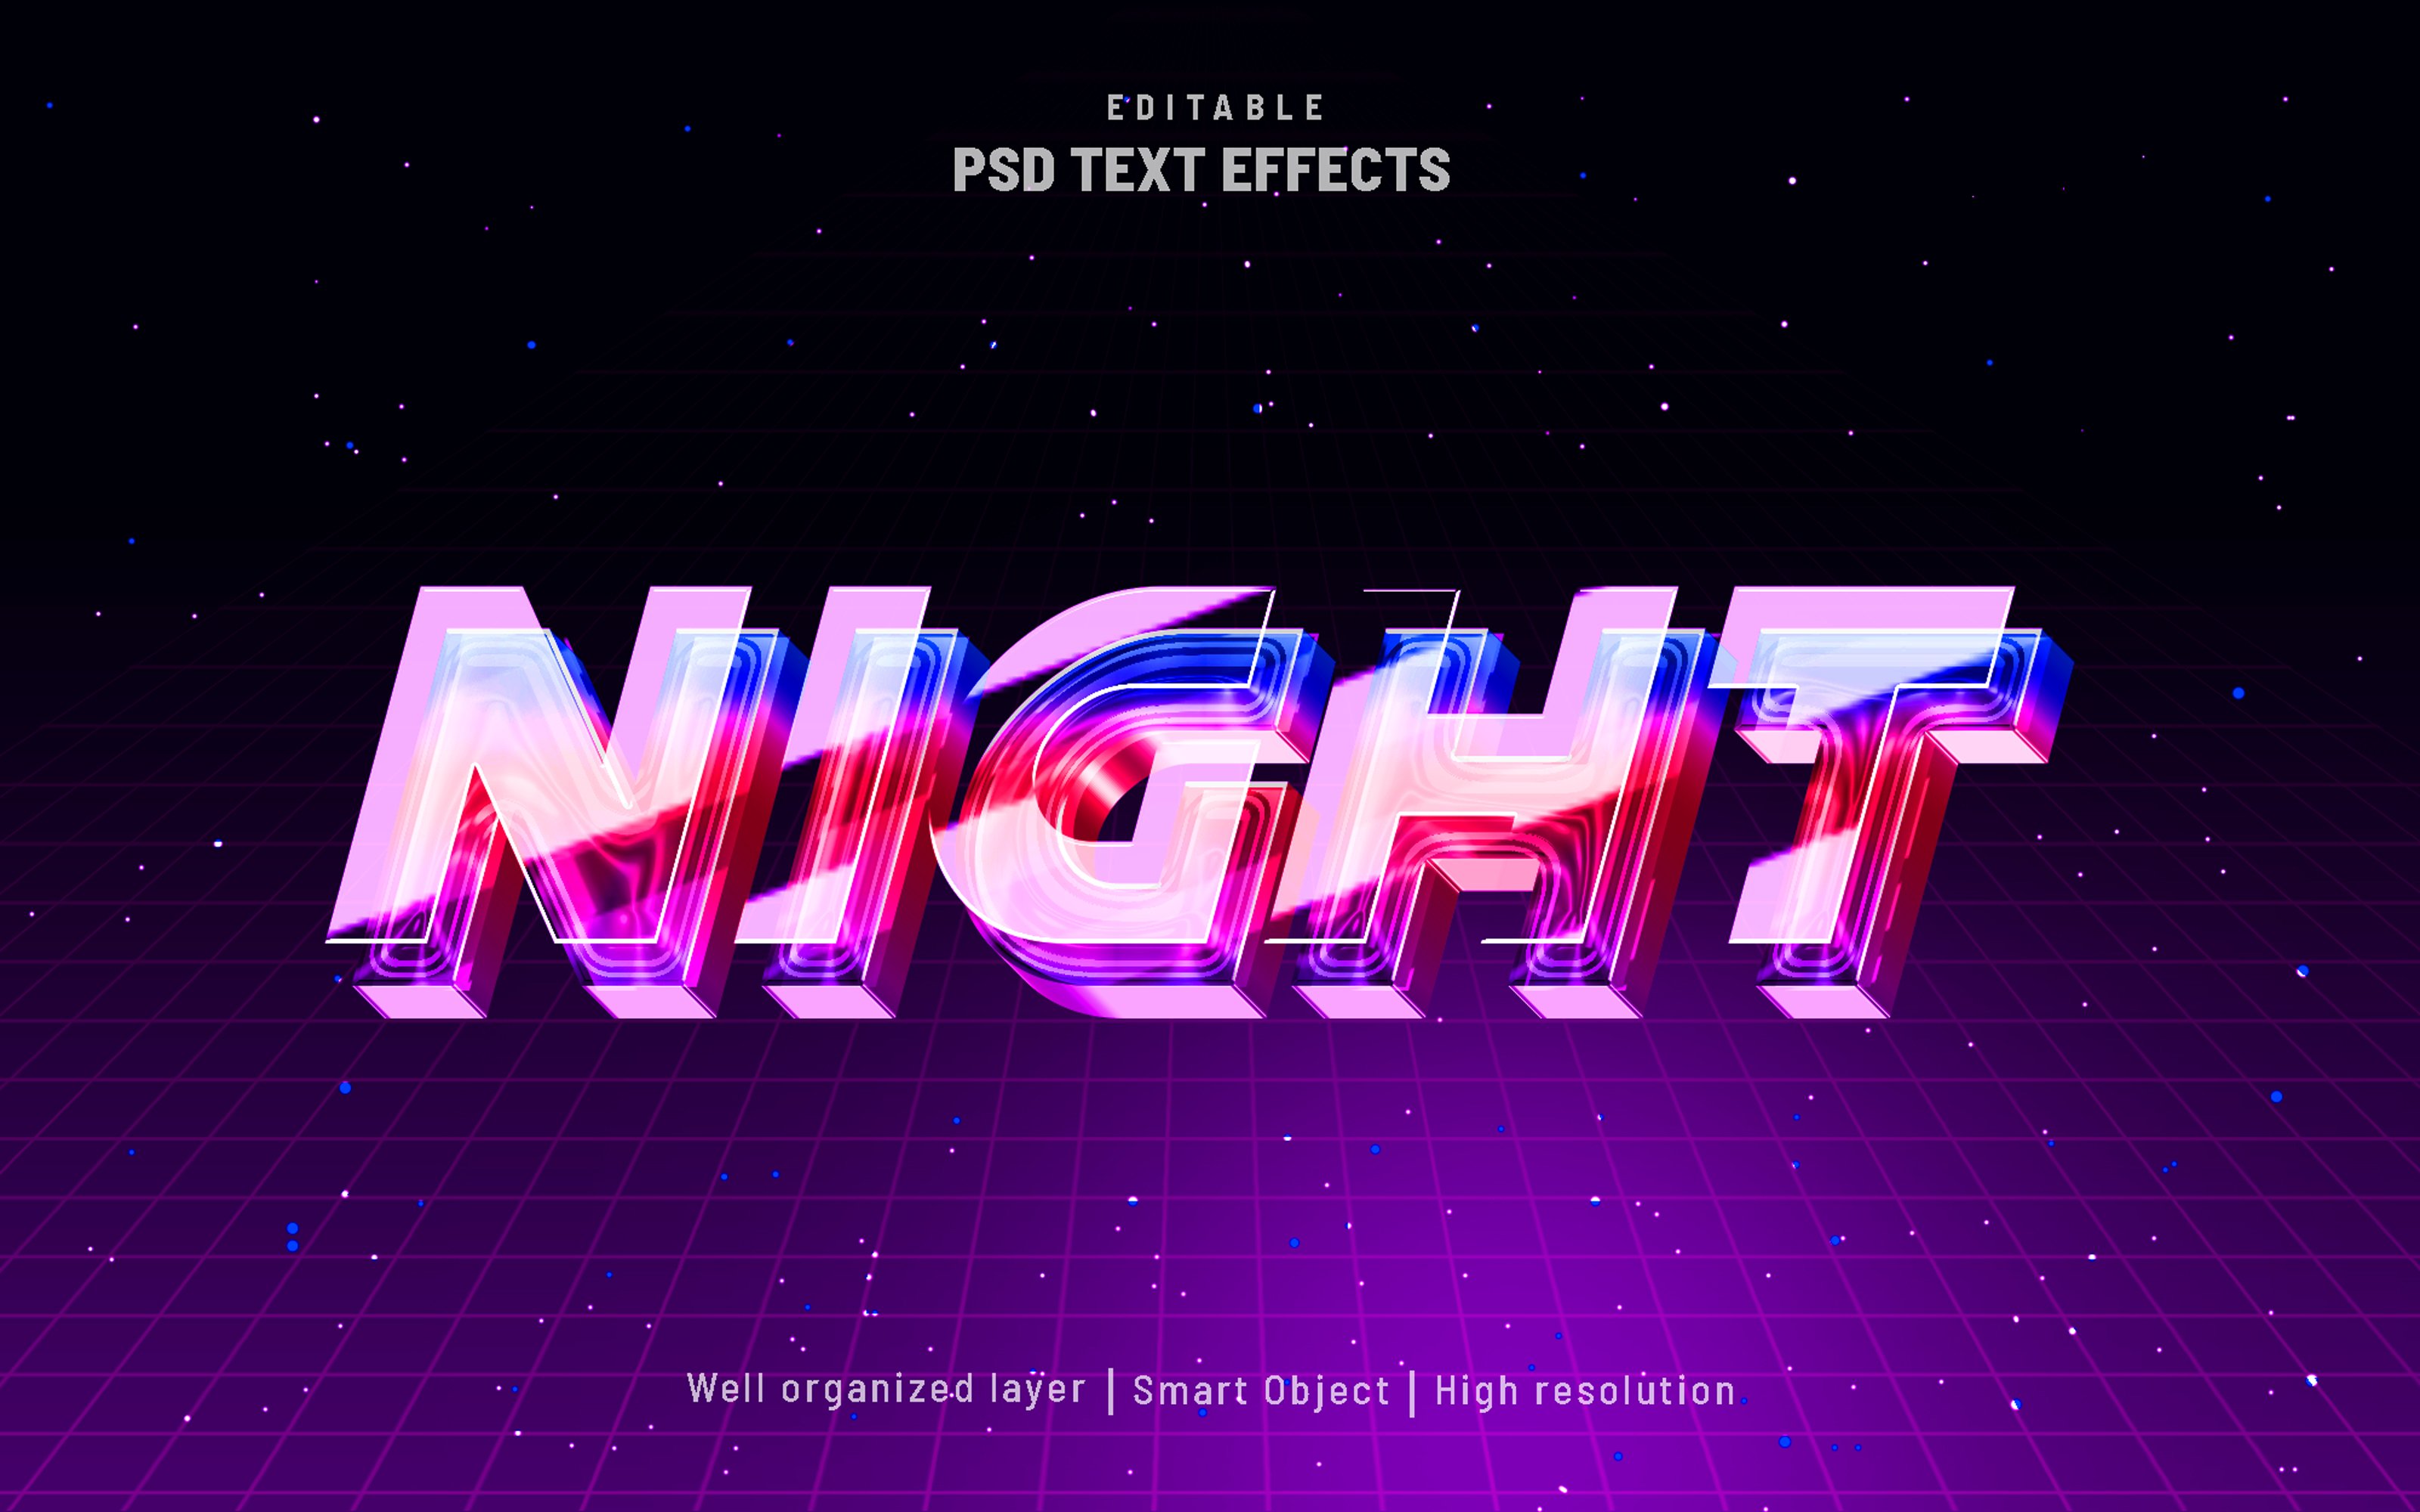 Night party editable text effect PSDcover image.